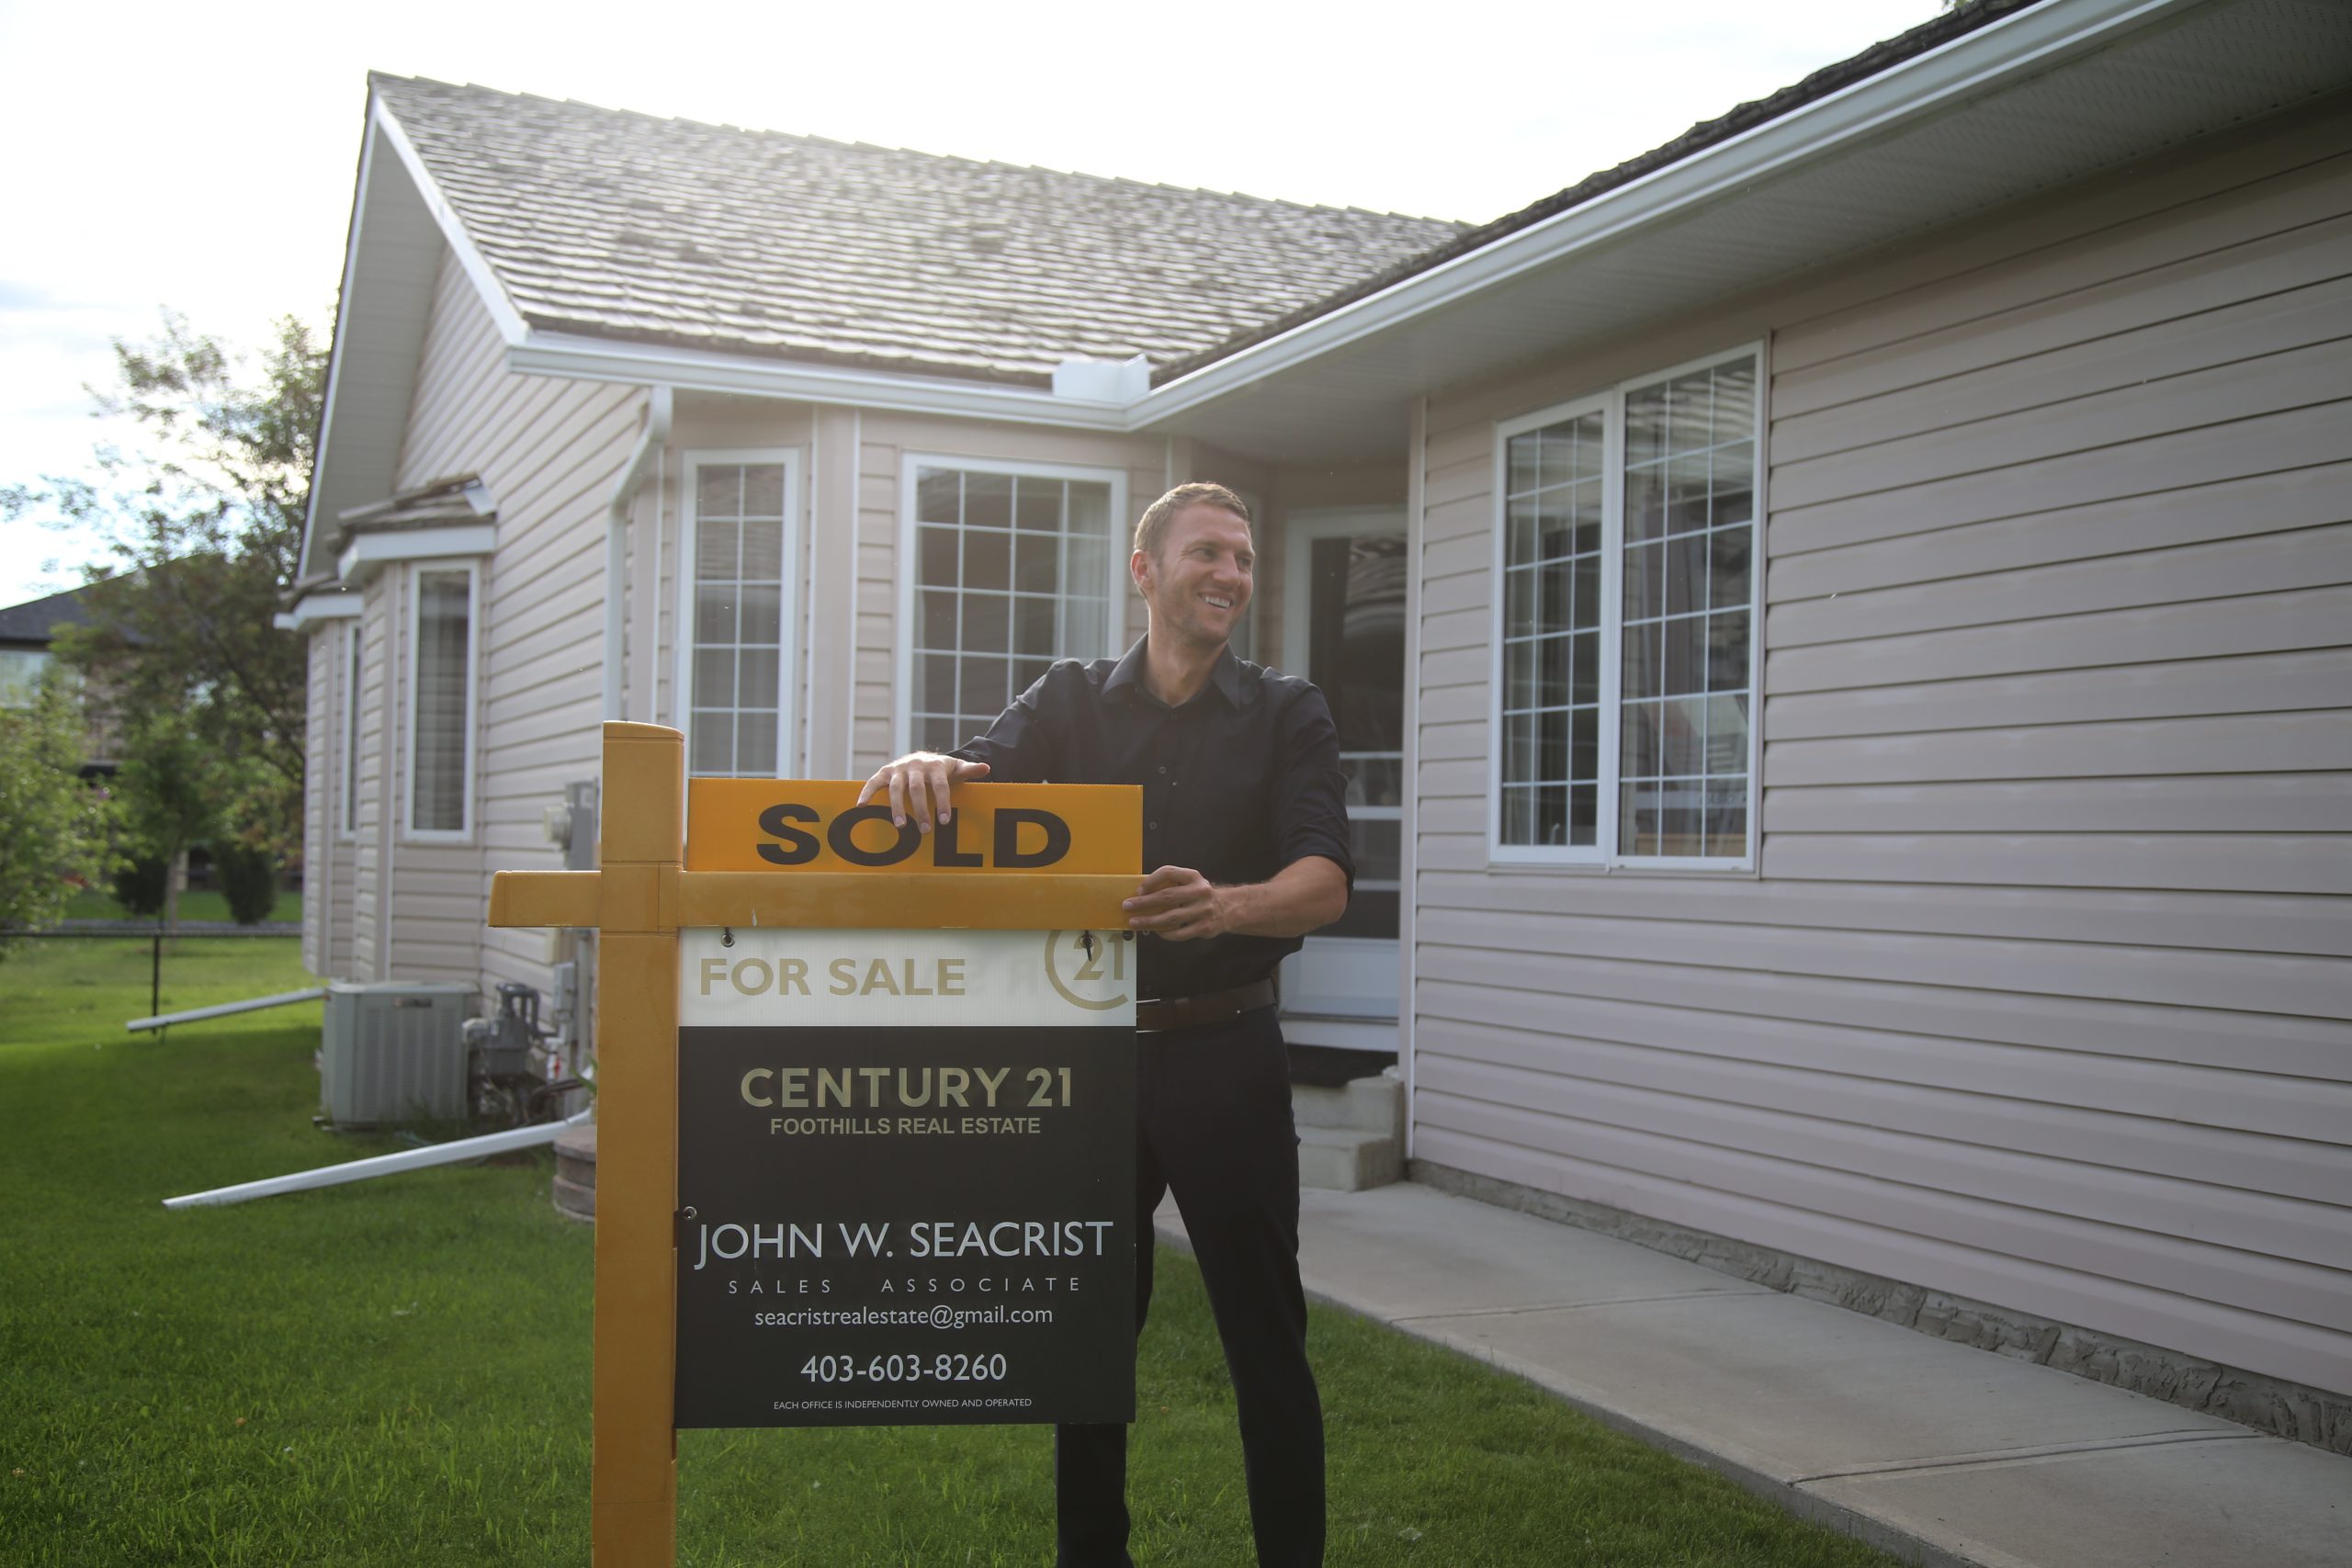 John Seacrist with sold sign